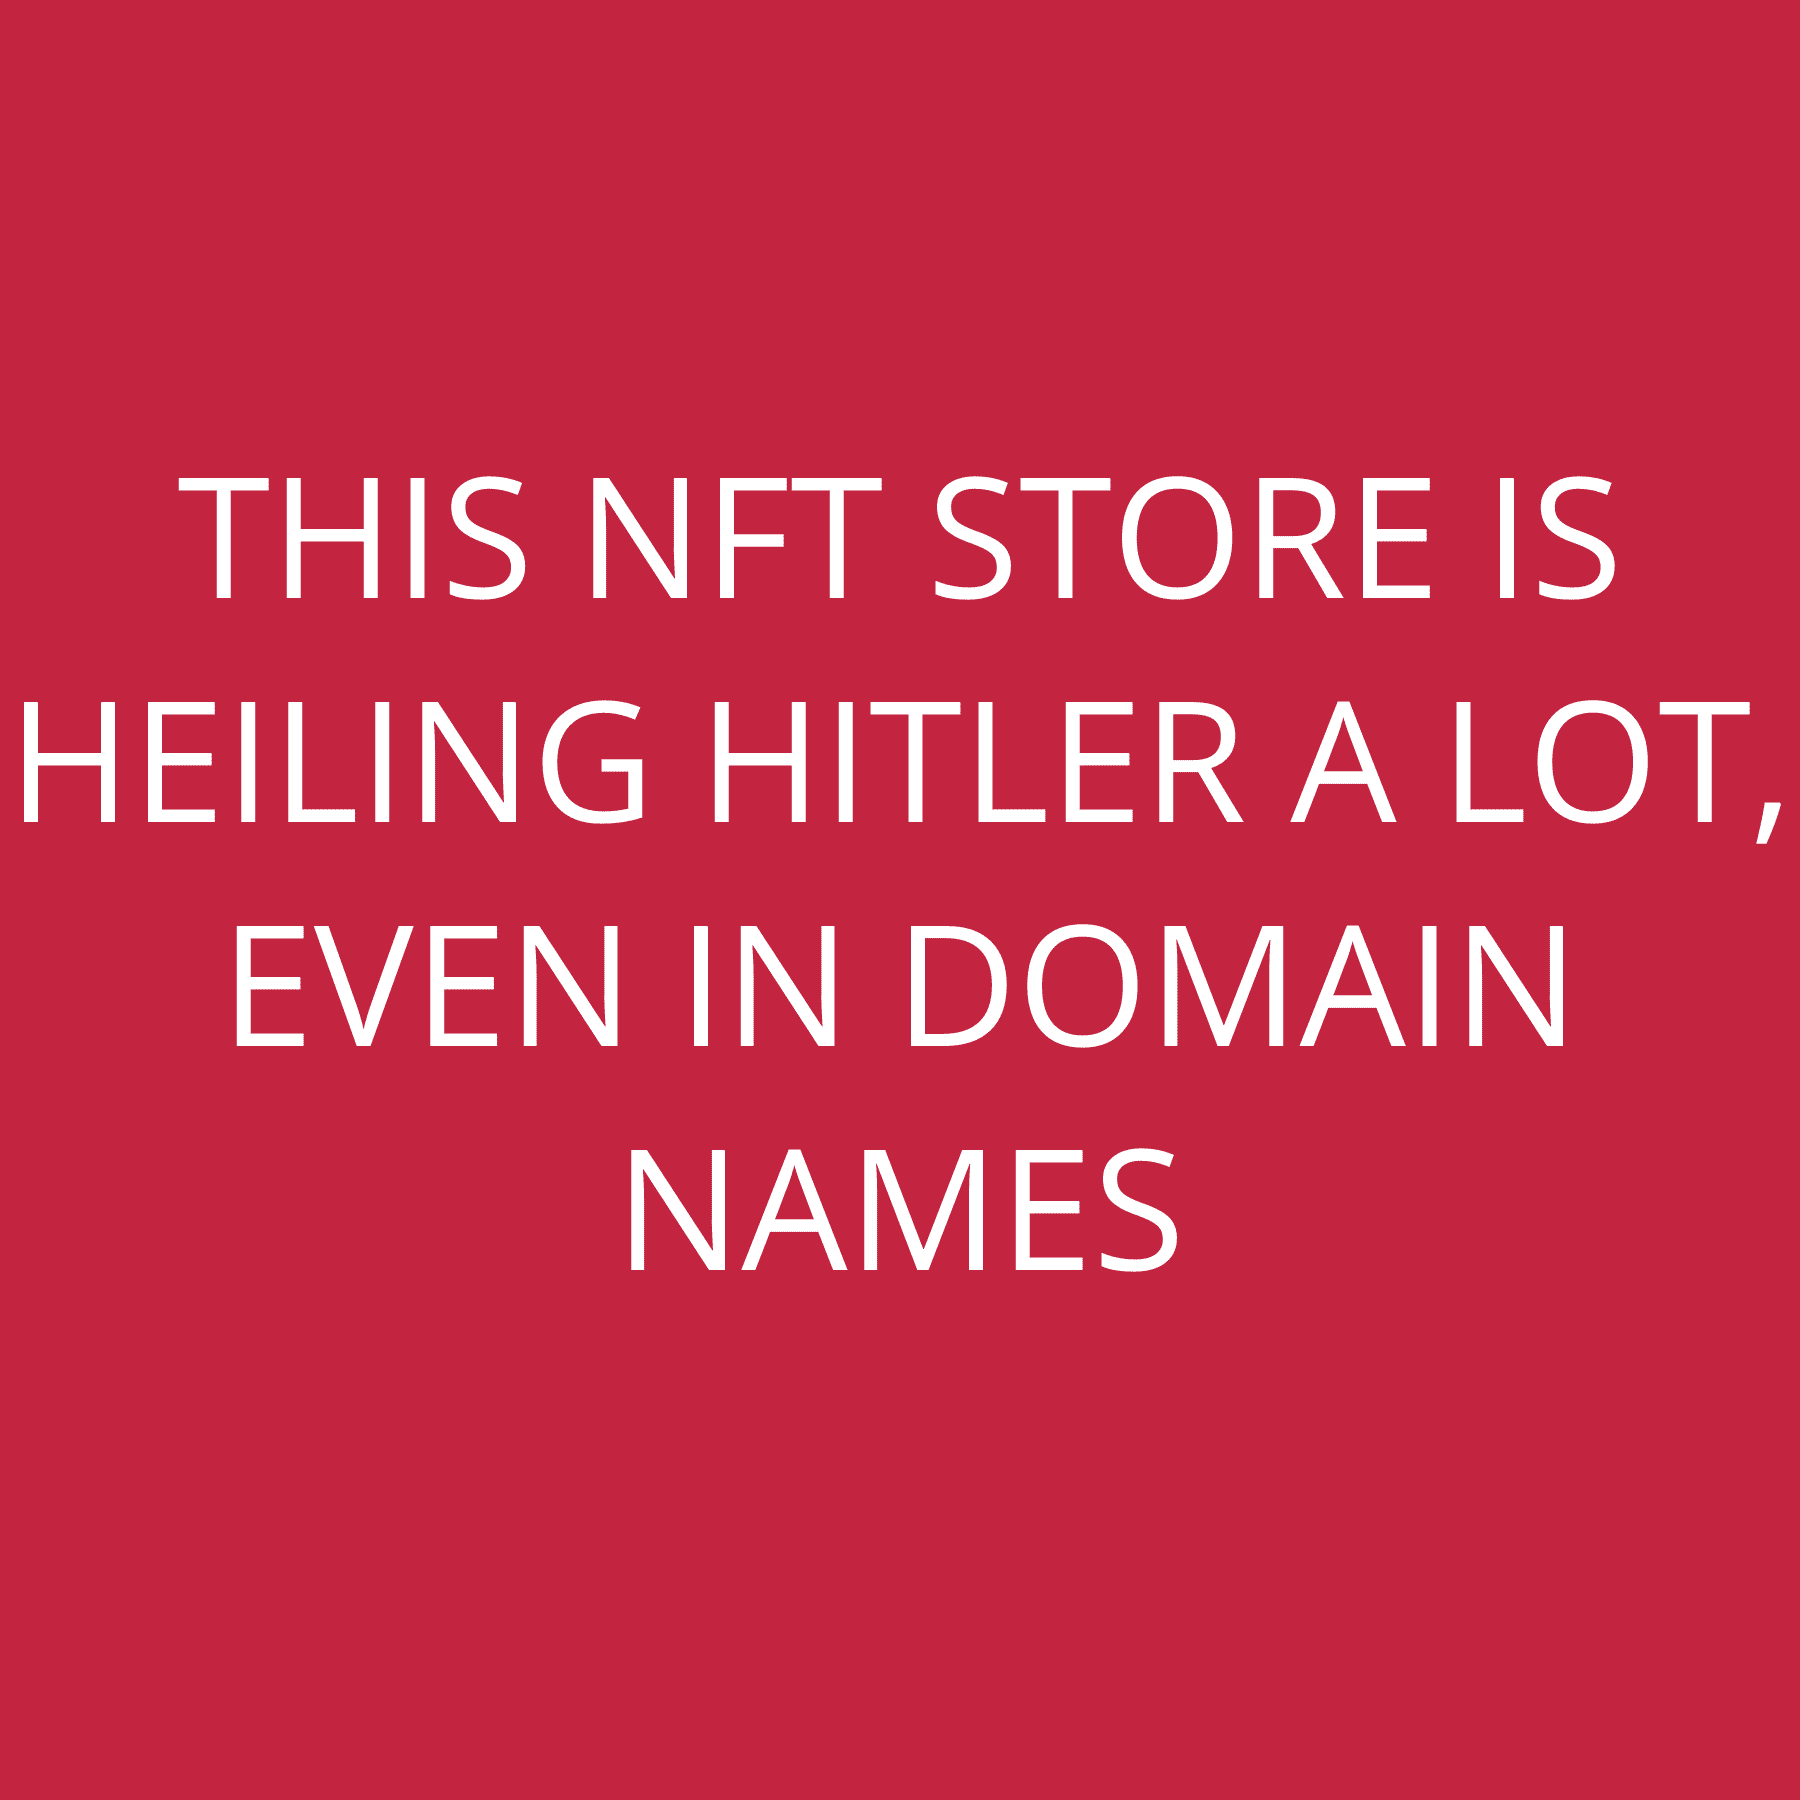 This NFT store is heiling Hitler a lot, even in domain names